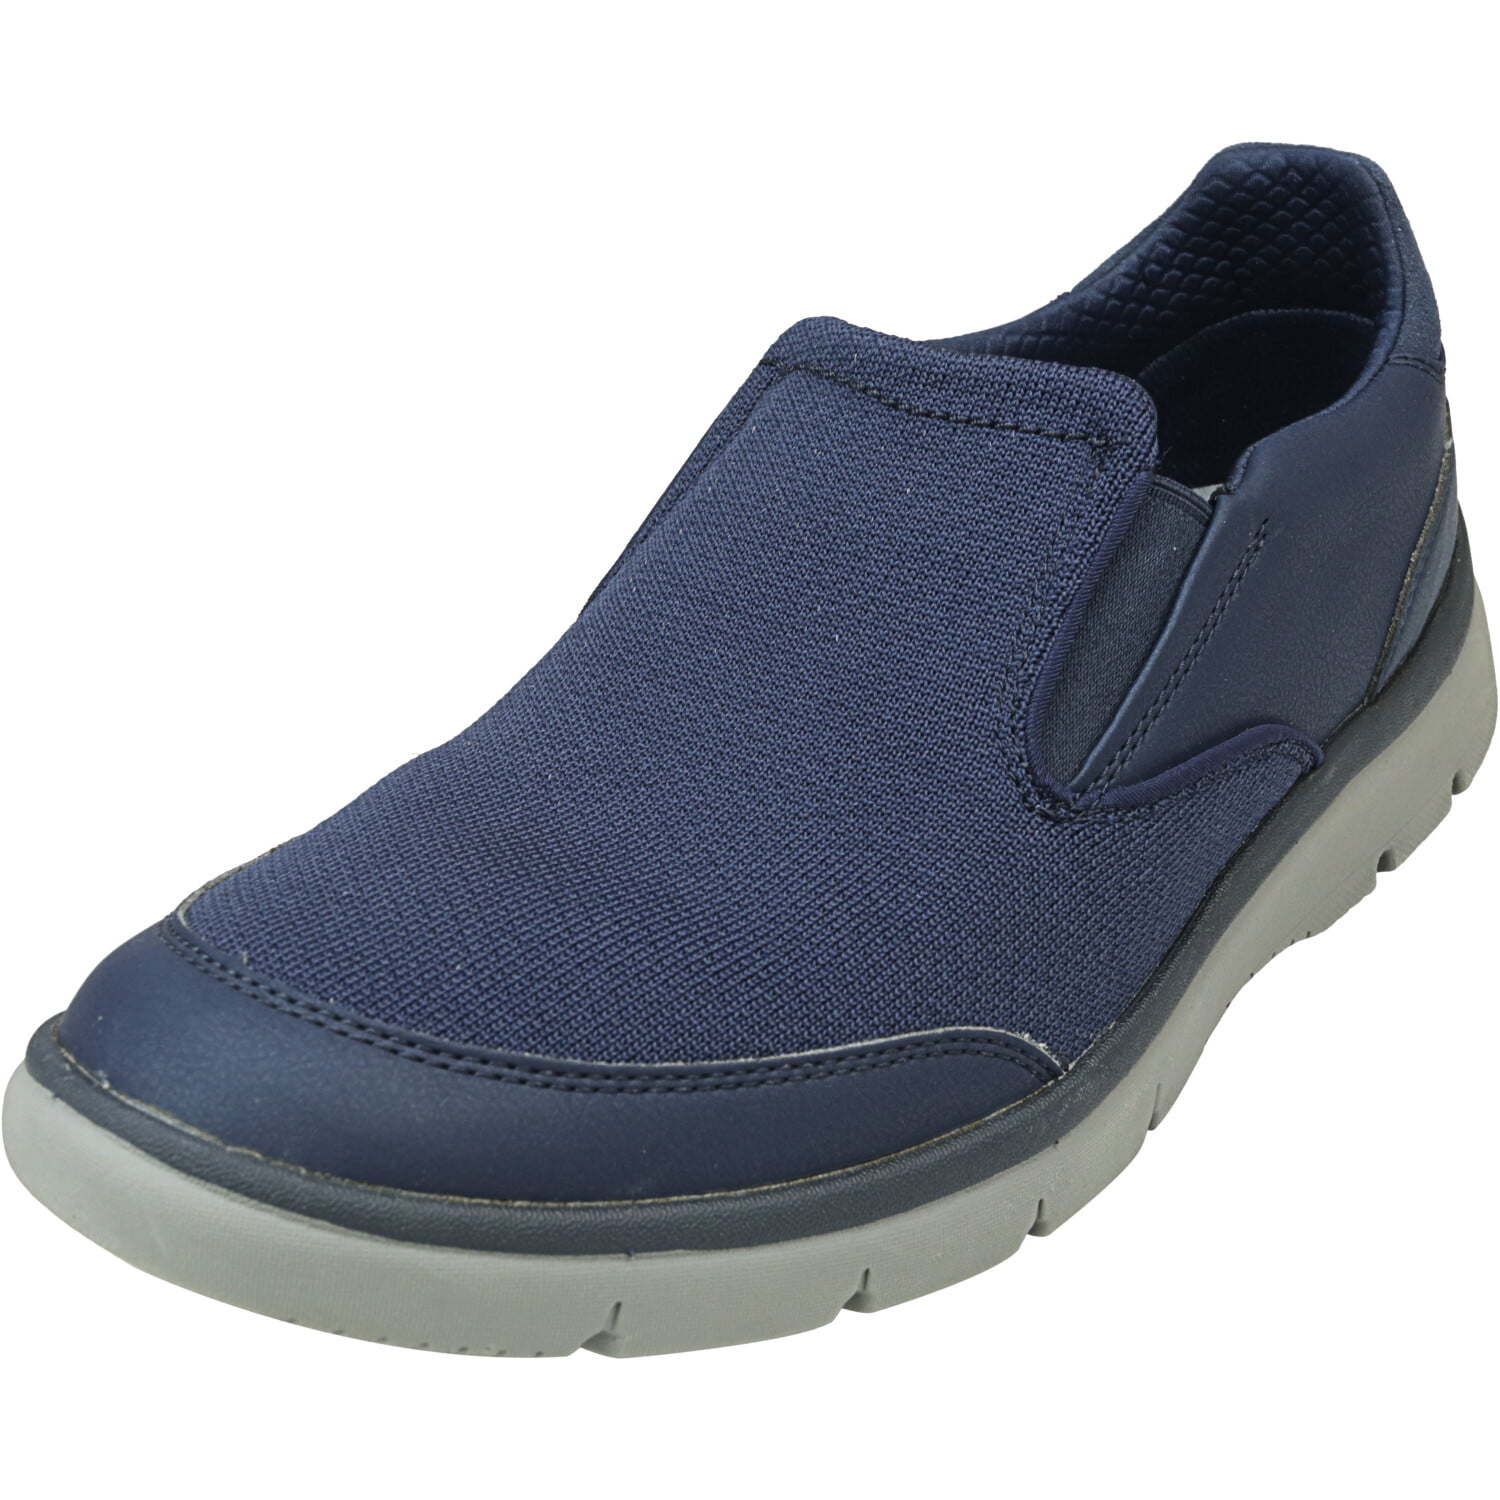 clarks fabric shoes